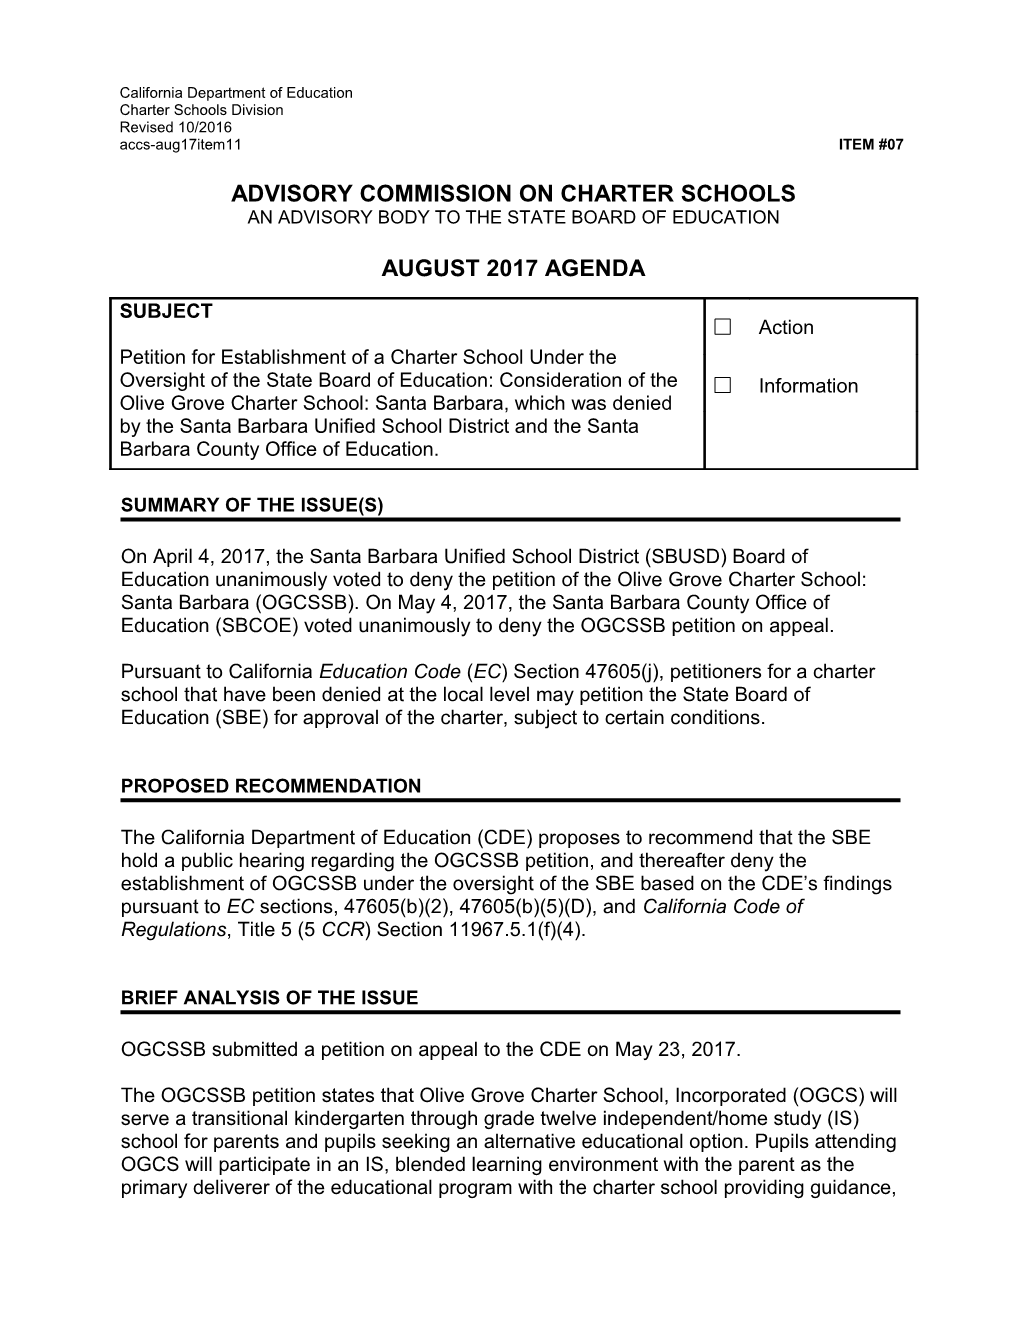 August 2017 ACCS Agenda Item 11 - Advisory Commission on Charter Schools (CA State Board